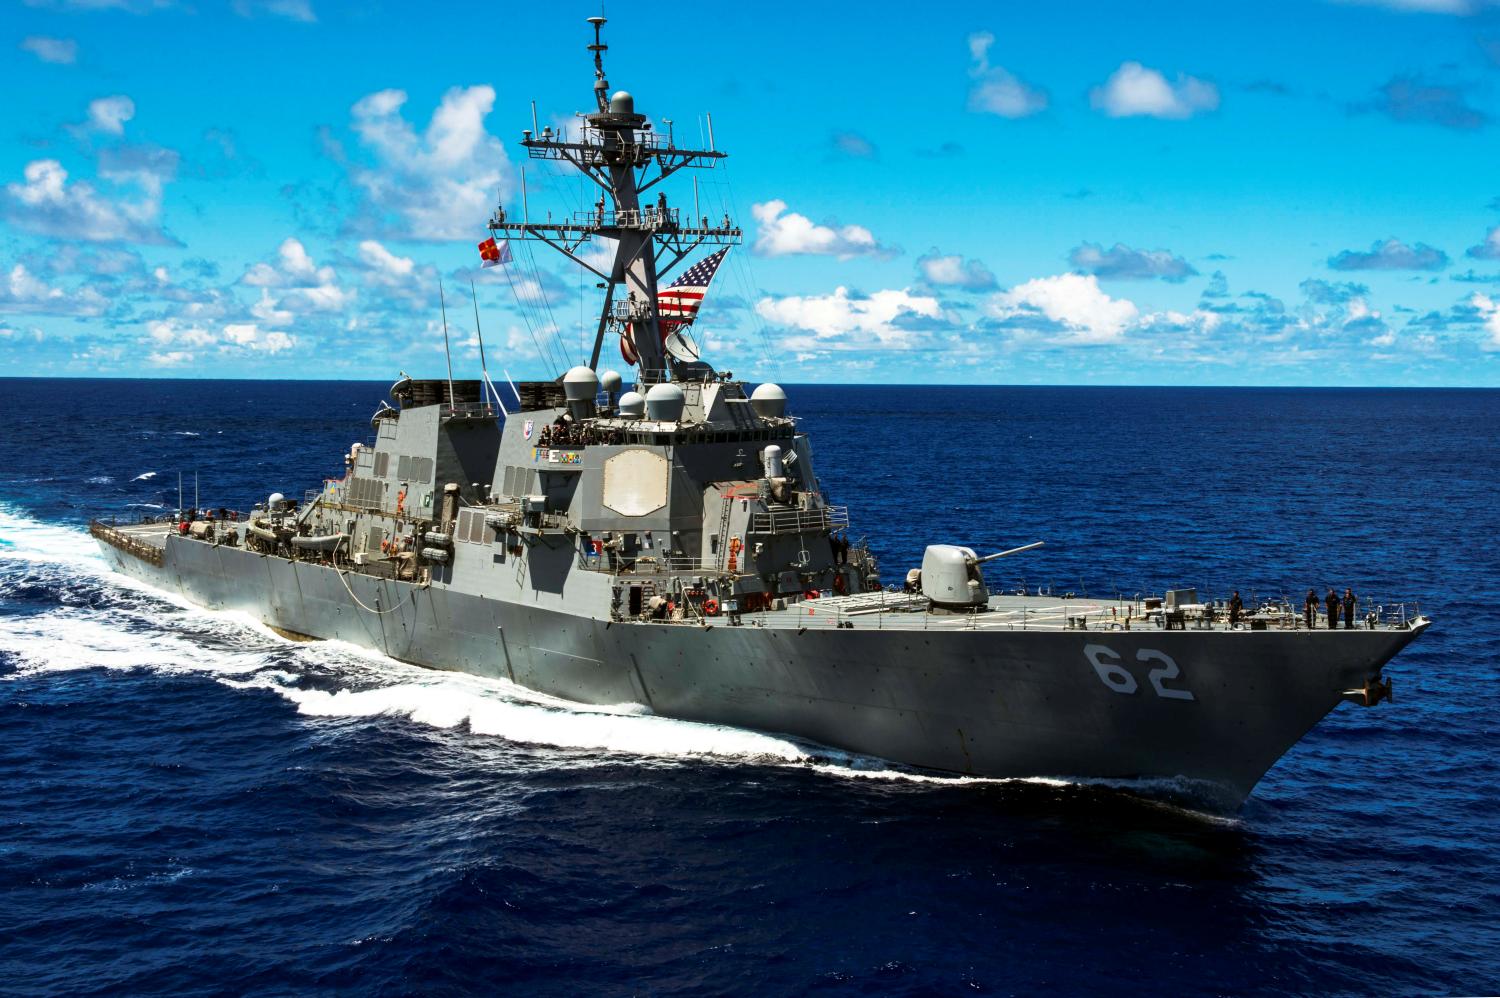 The Arleigh Burke class guided-missile destroyer USS Fitzgerald is shown on patrol in the U.S. 7th Fleet area of responsibility in support of security and stability in the  Pacific Ocean in this September 8, 2014 handout photo.  Courtesy  of U.S. Navy/Mass Communication Specialist Seaman David Flewellyn/Handout via REUTERS    ATTENTION EDITORS - THIS IMAGE WAS PROVIDED BY A THIRD PARTY.